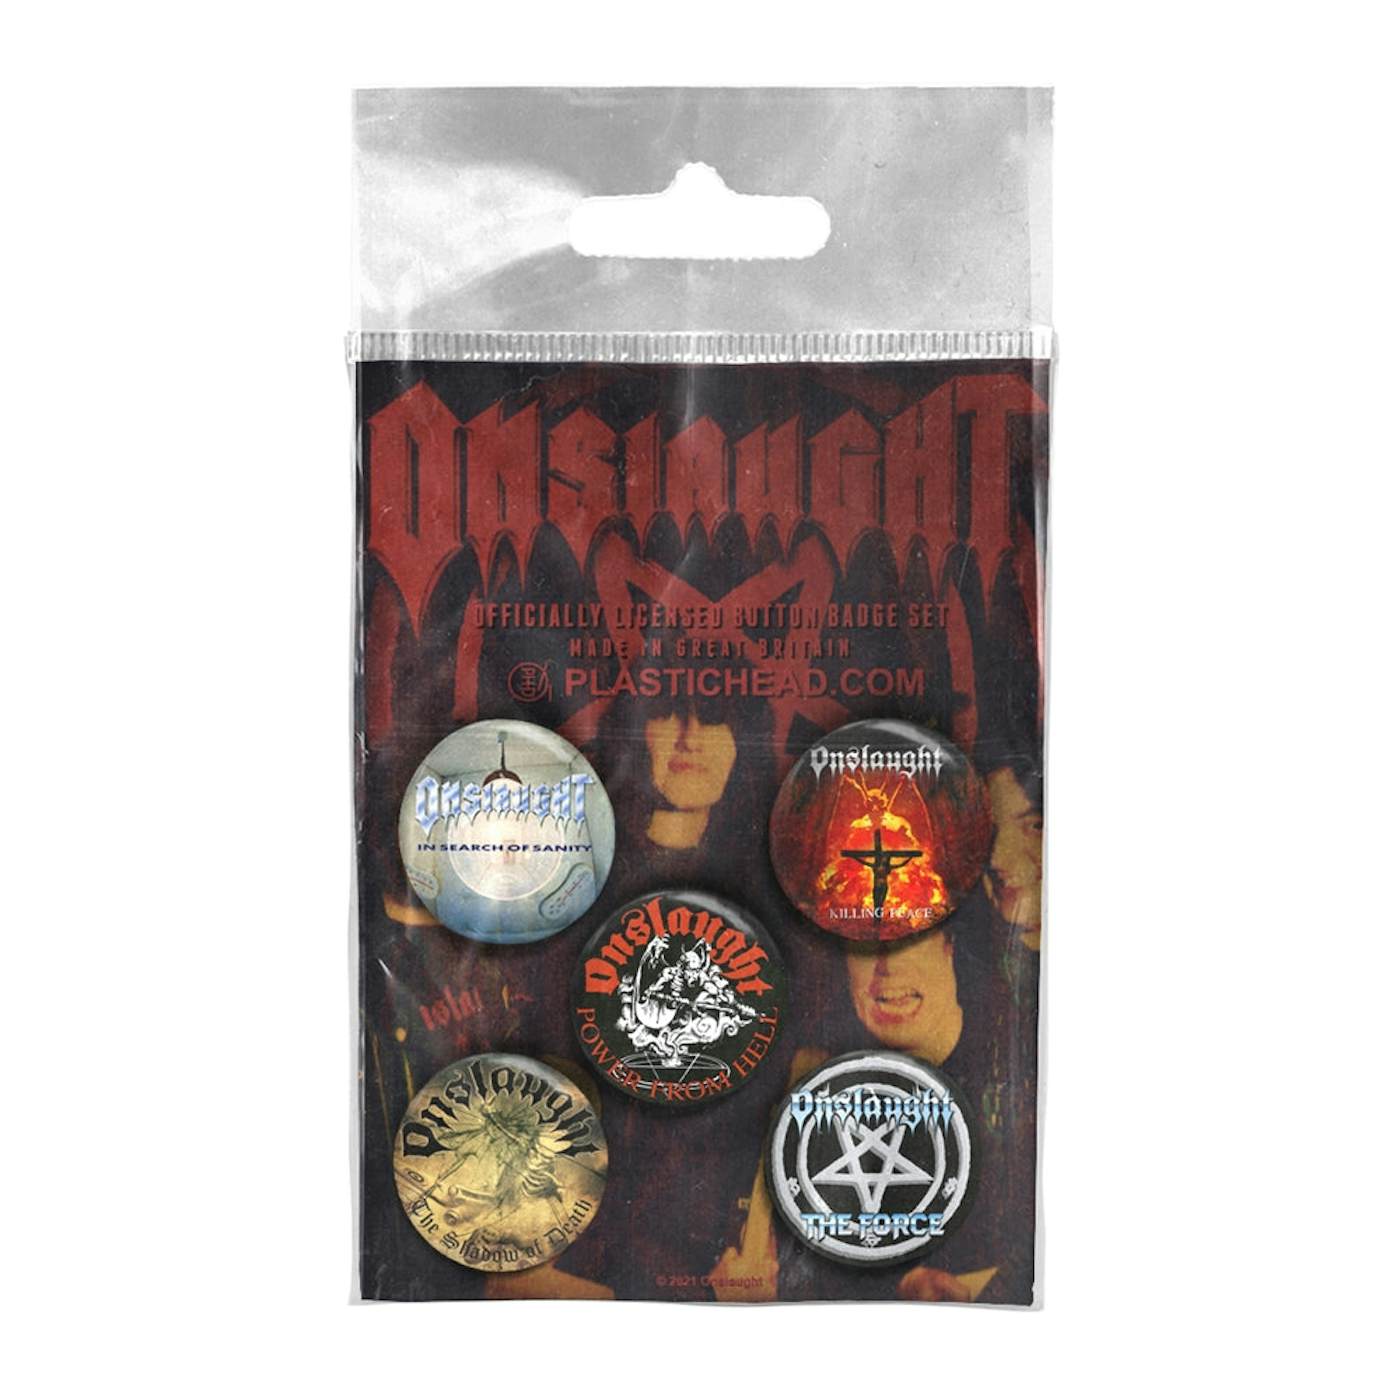 Onslaught Badge Pack - Onslaught Button Badge Set